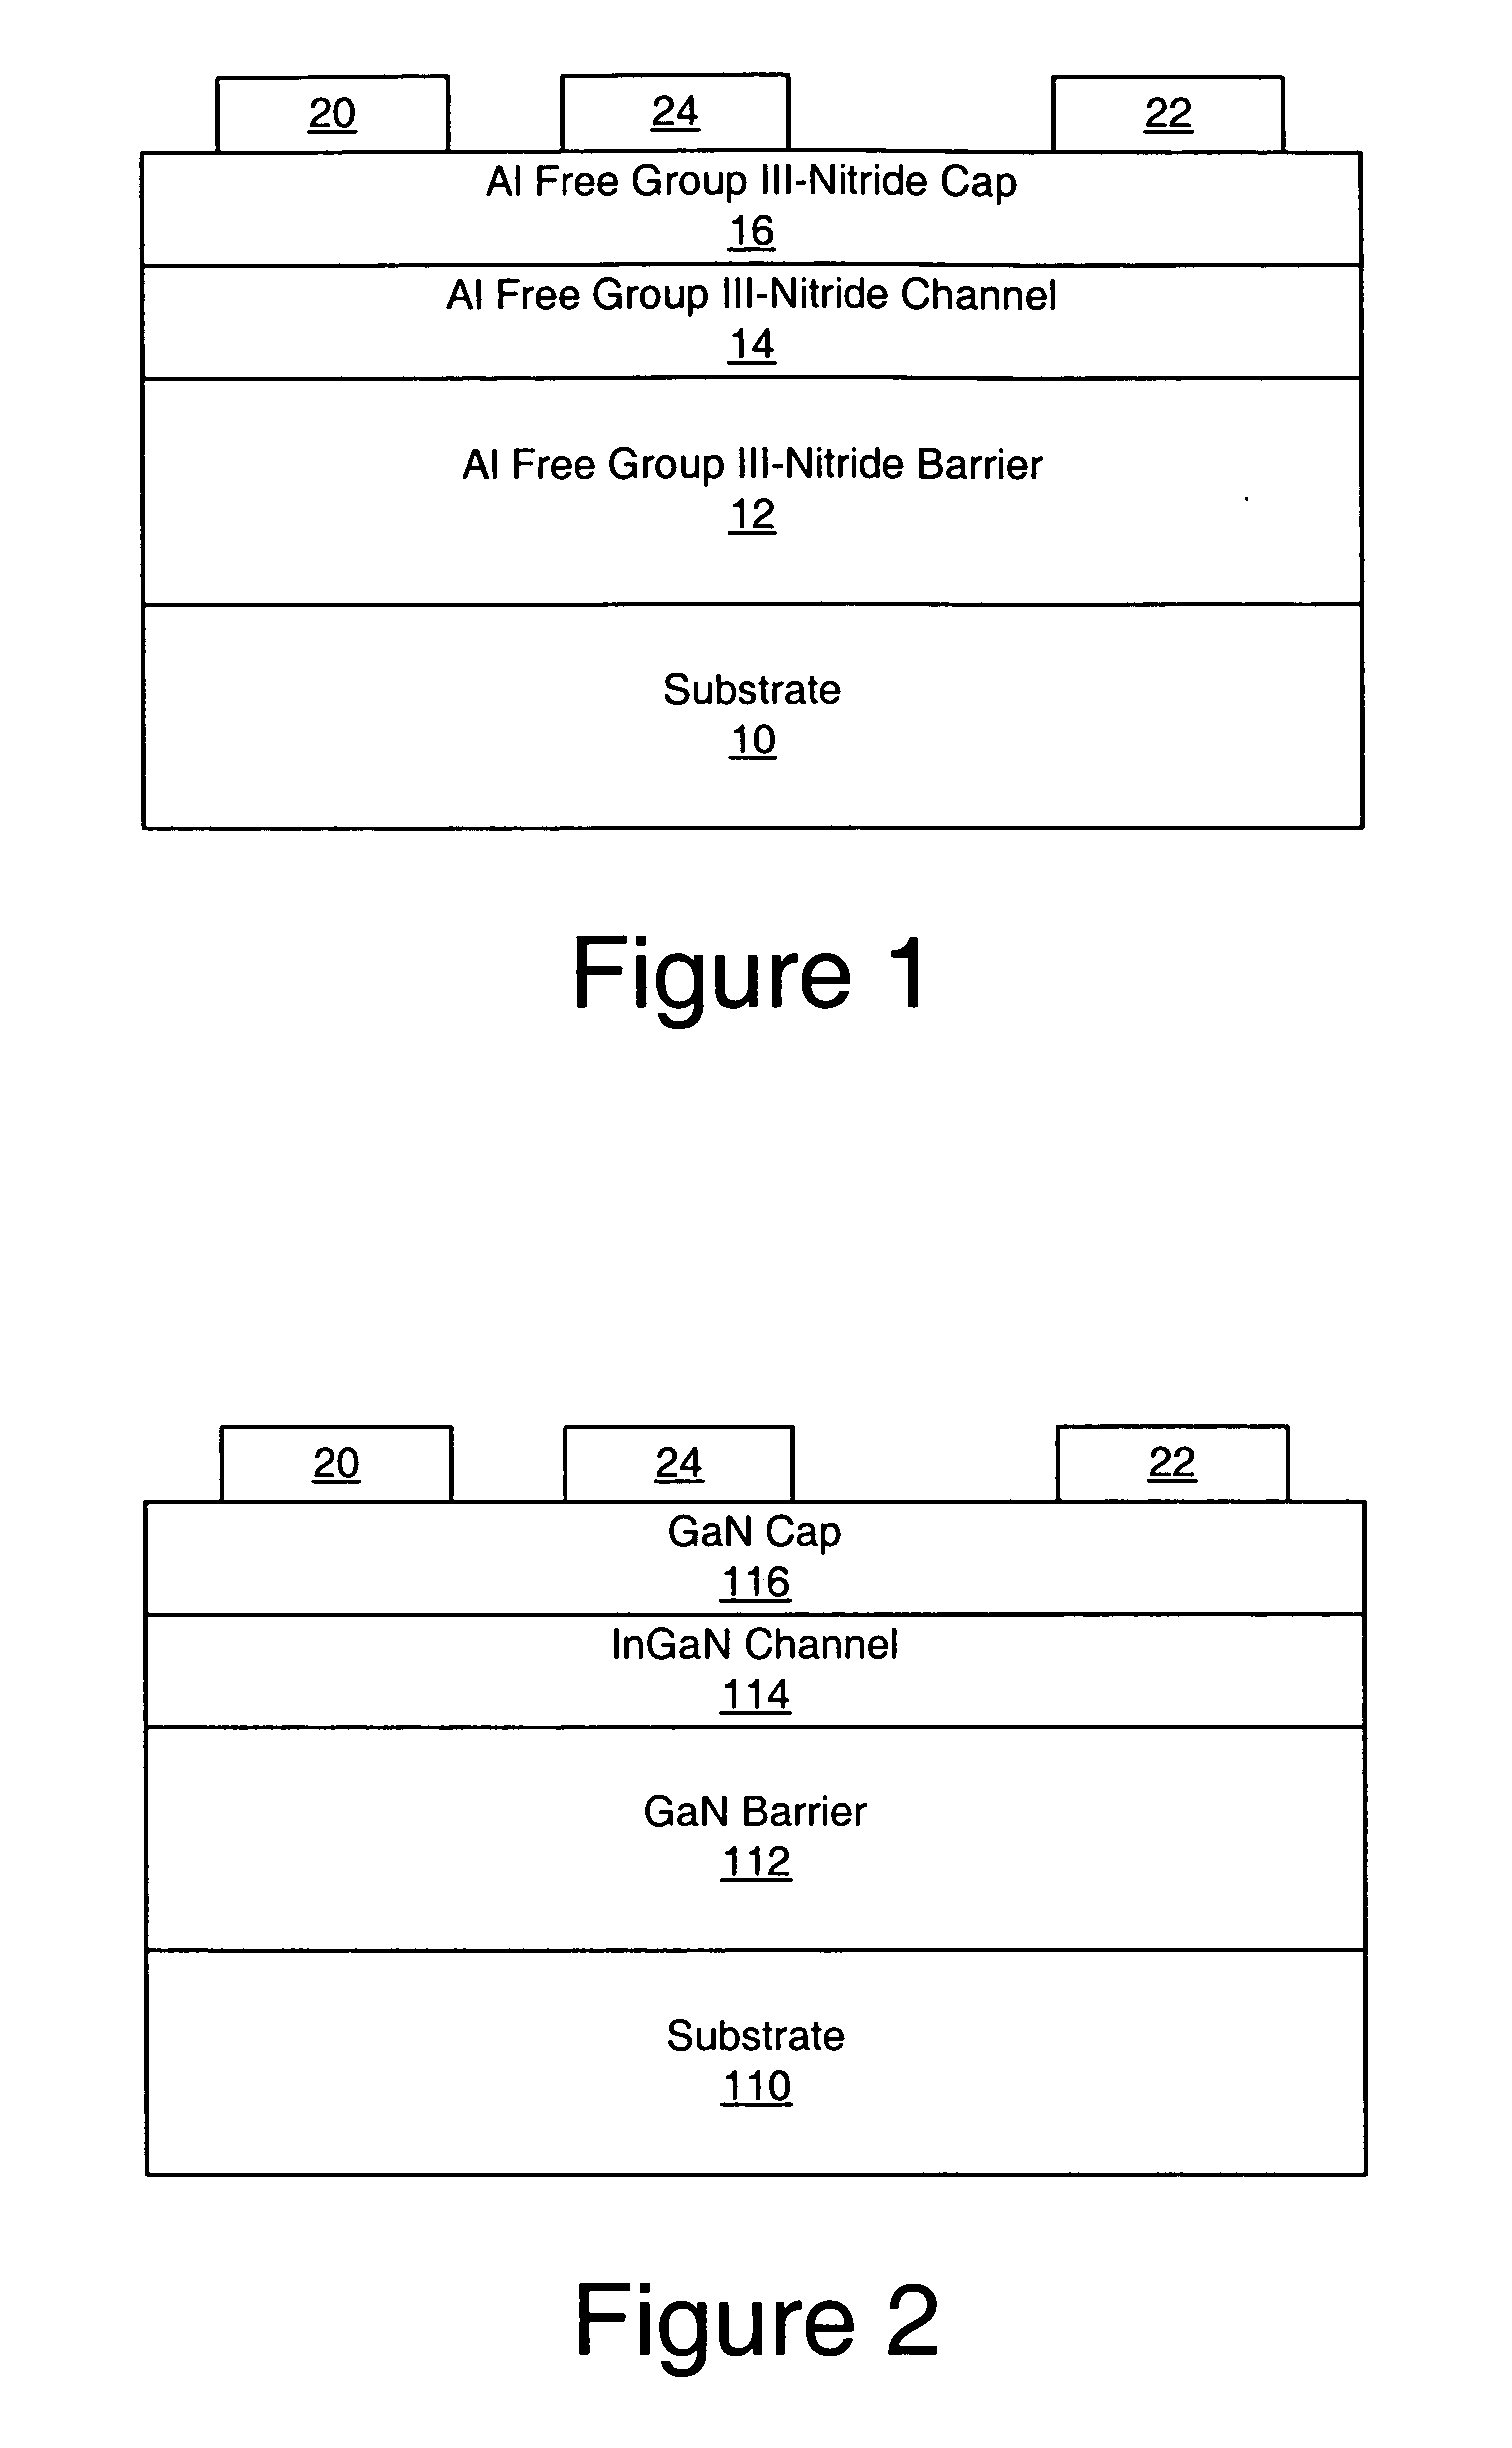 Aluminum free group III-nitride based high electron mobility transistors and methods of fabricating same